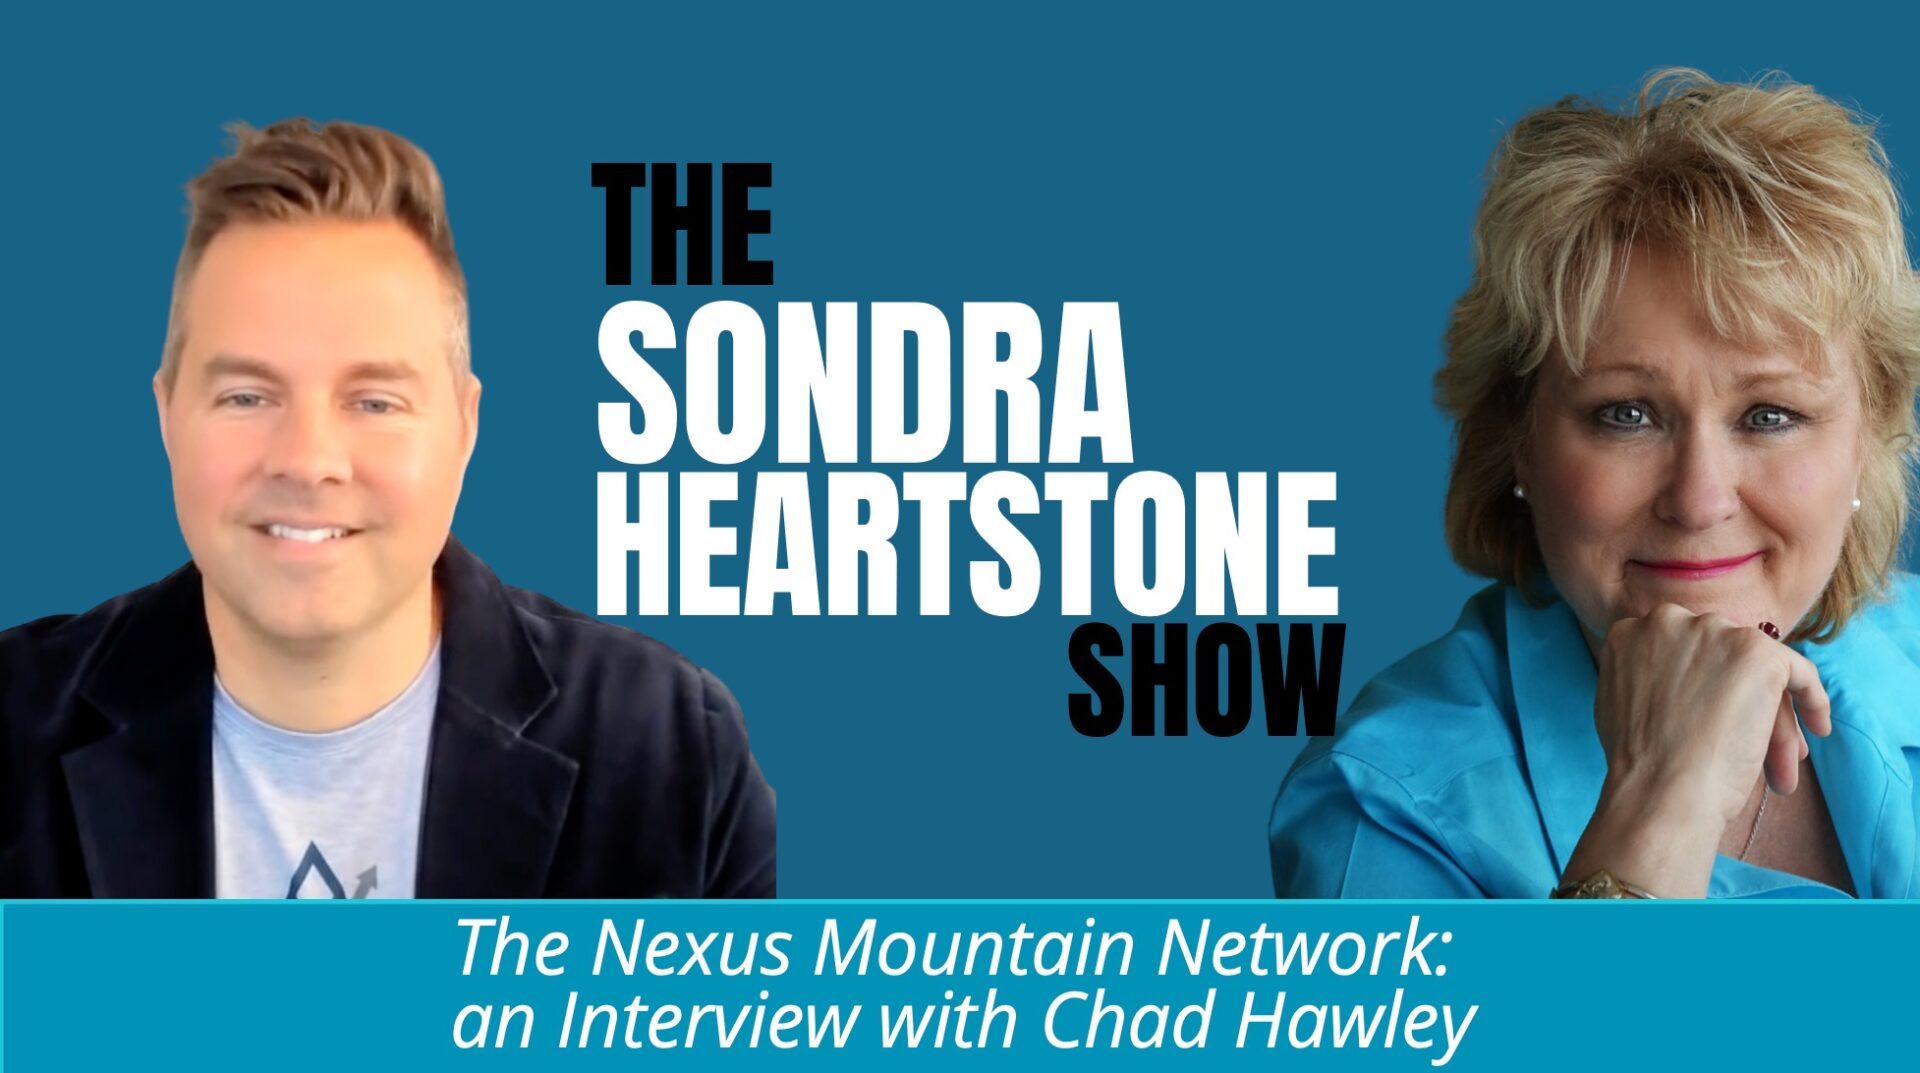 The Nexus Mountain Network: an Interview with Chad Hawley